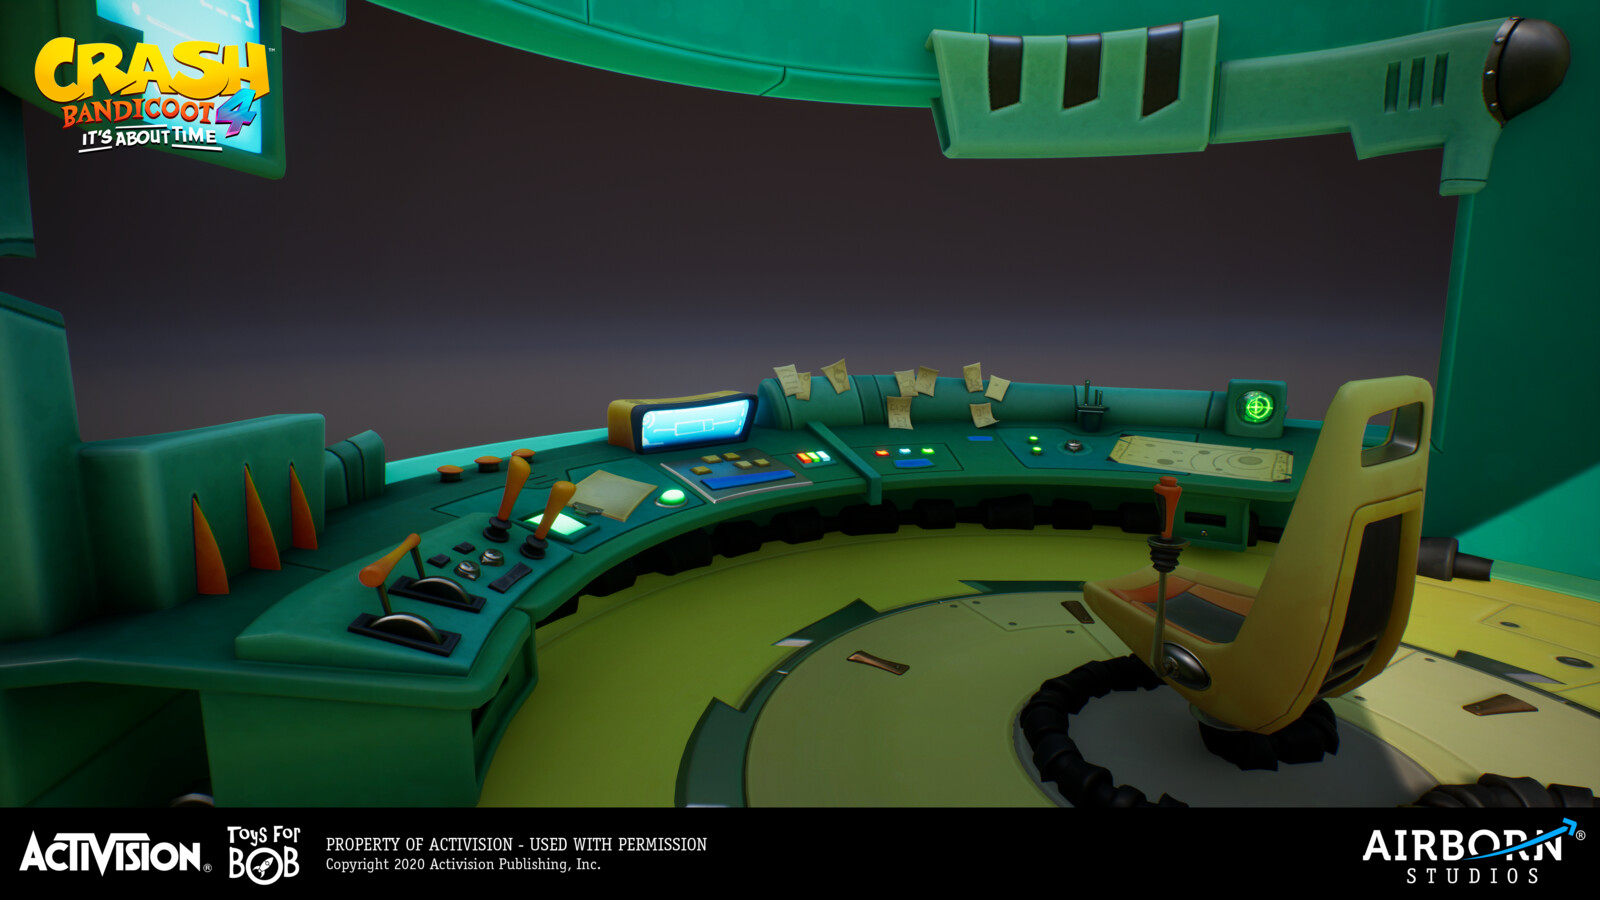 Neo Cortex Control Room - 3D work done by Frederic Fouque; support by Benjamin Sauer and Manuel Virks (lighting)